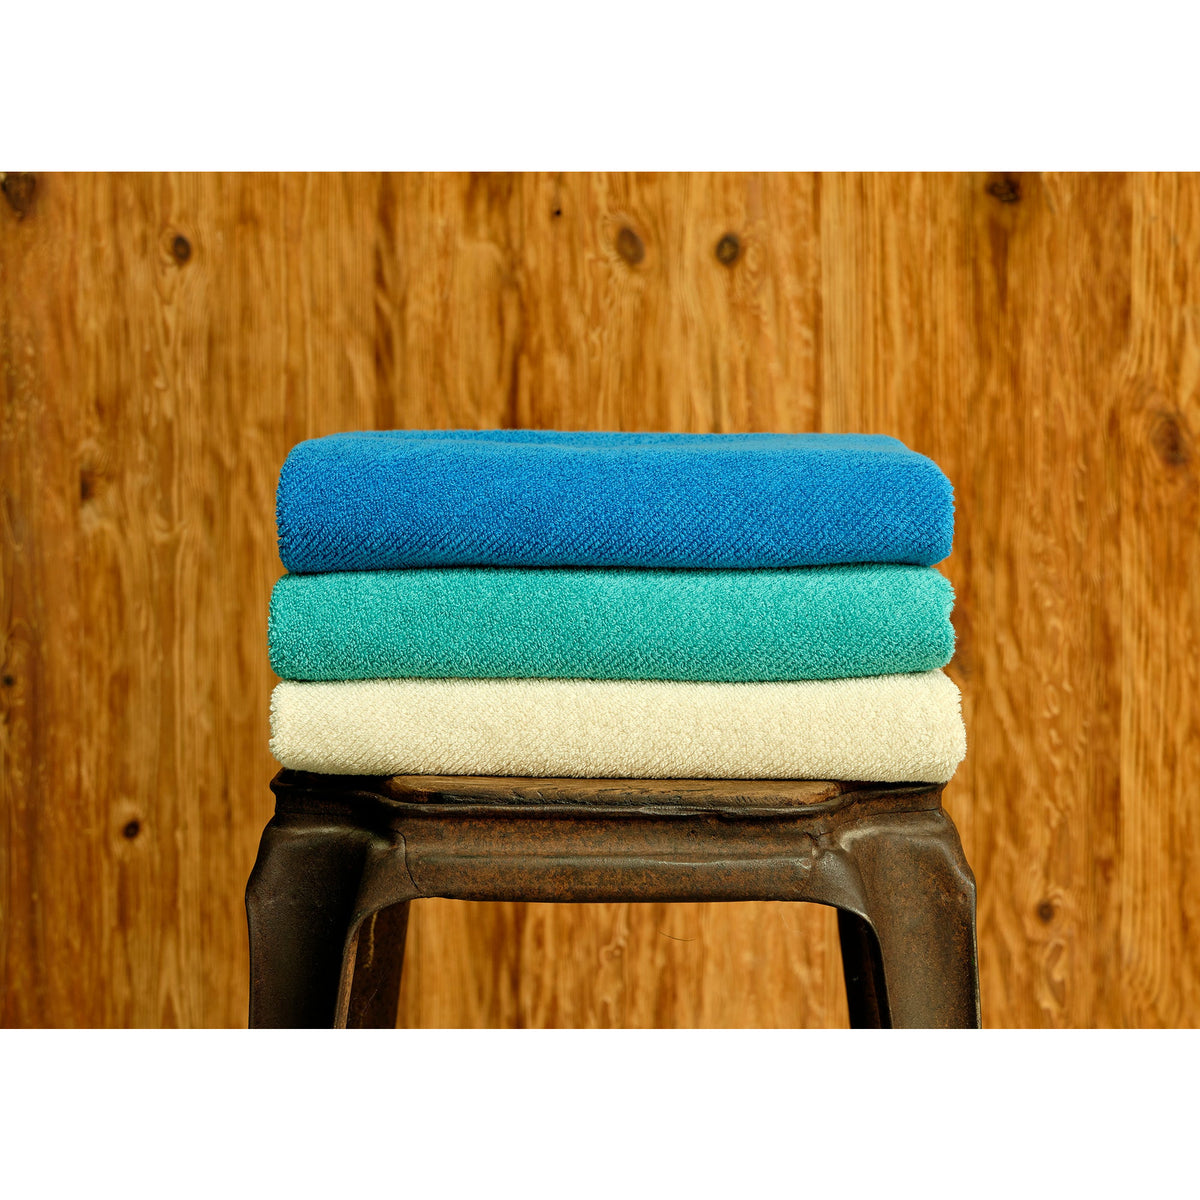 Abyss Twill Bath Towels Stack On StoolIce Fine Linens